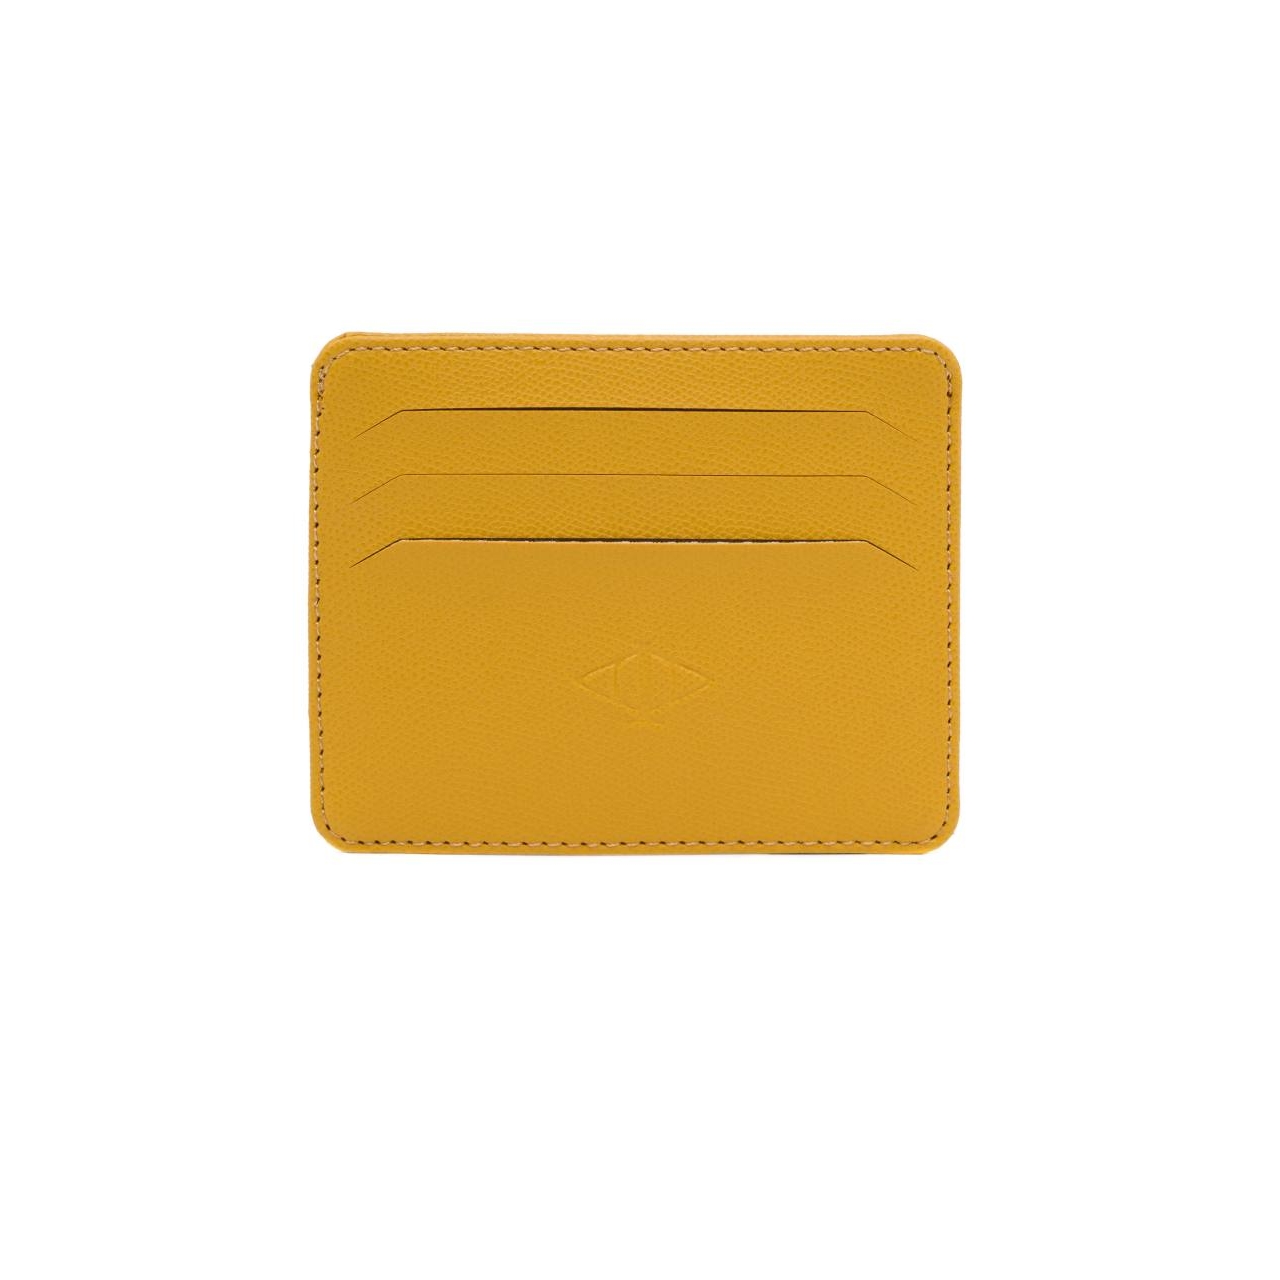 Dellel - Card Holder Mustard - SOLD OUT | hipicon